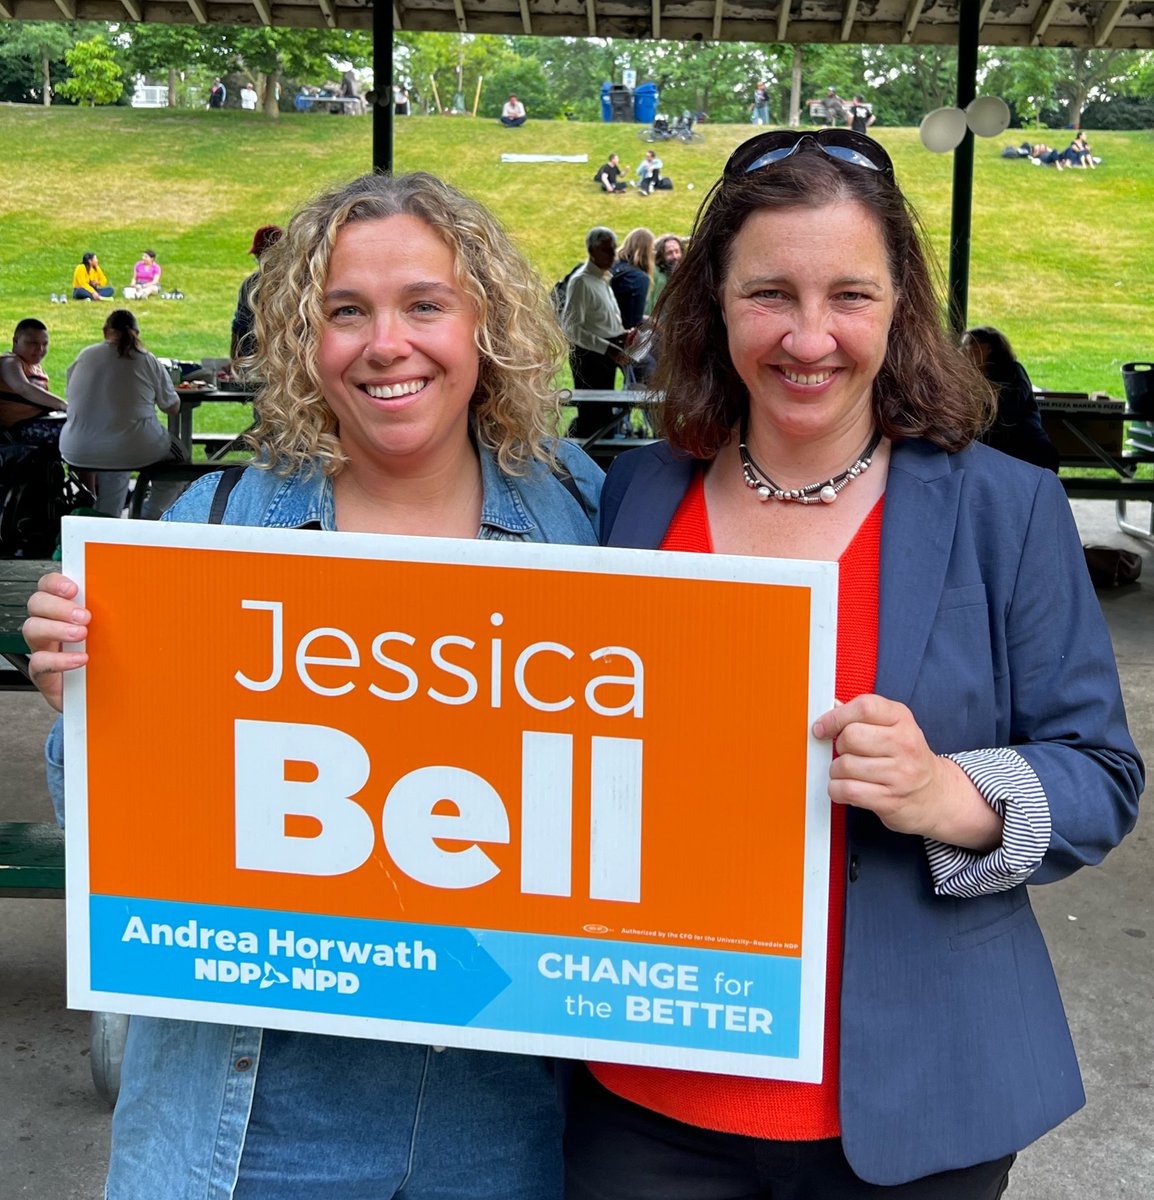 #UniRose riding association prez Andrea Creamer and I at our supporter picnic at Christie Pits tonight. Our AGM is coming up so reach out if you want to organize with us and prepare for the Ontario NDP leadership race.